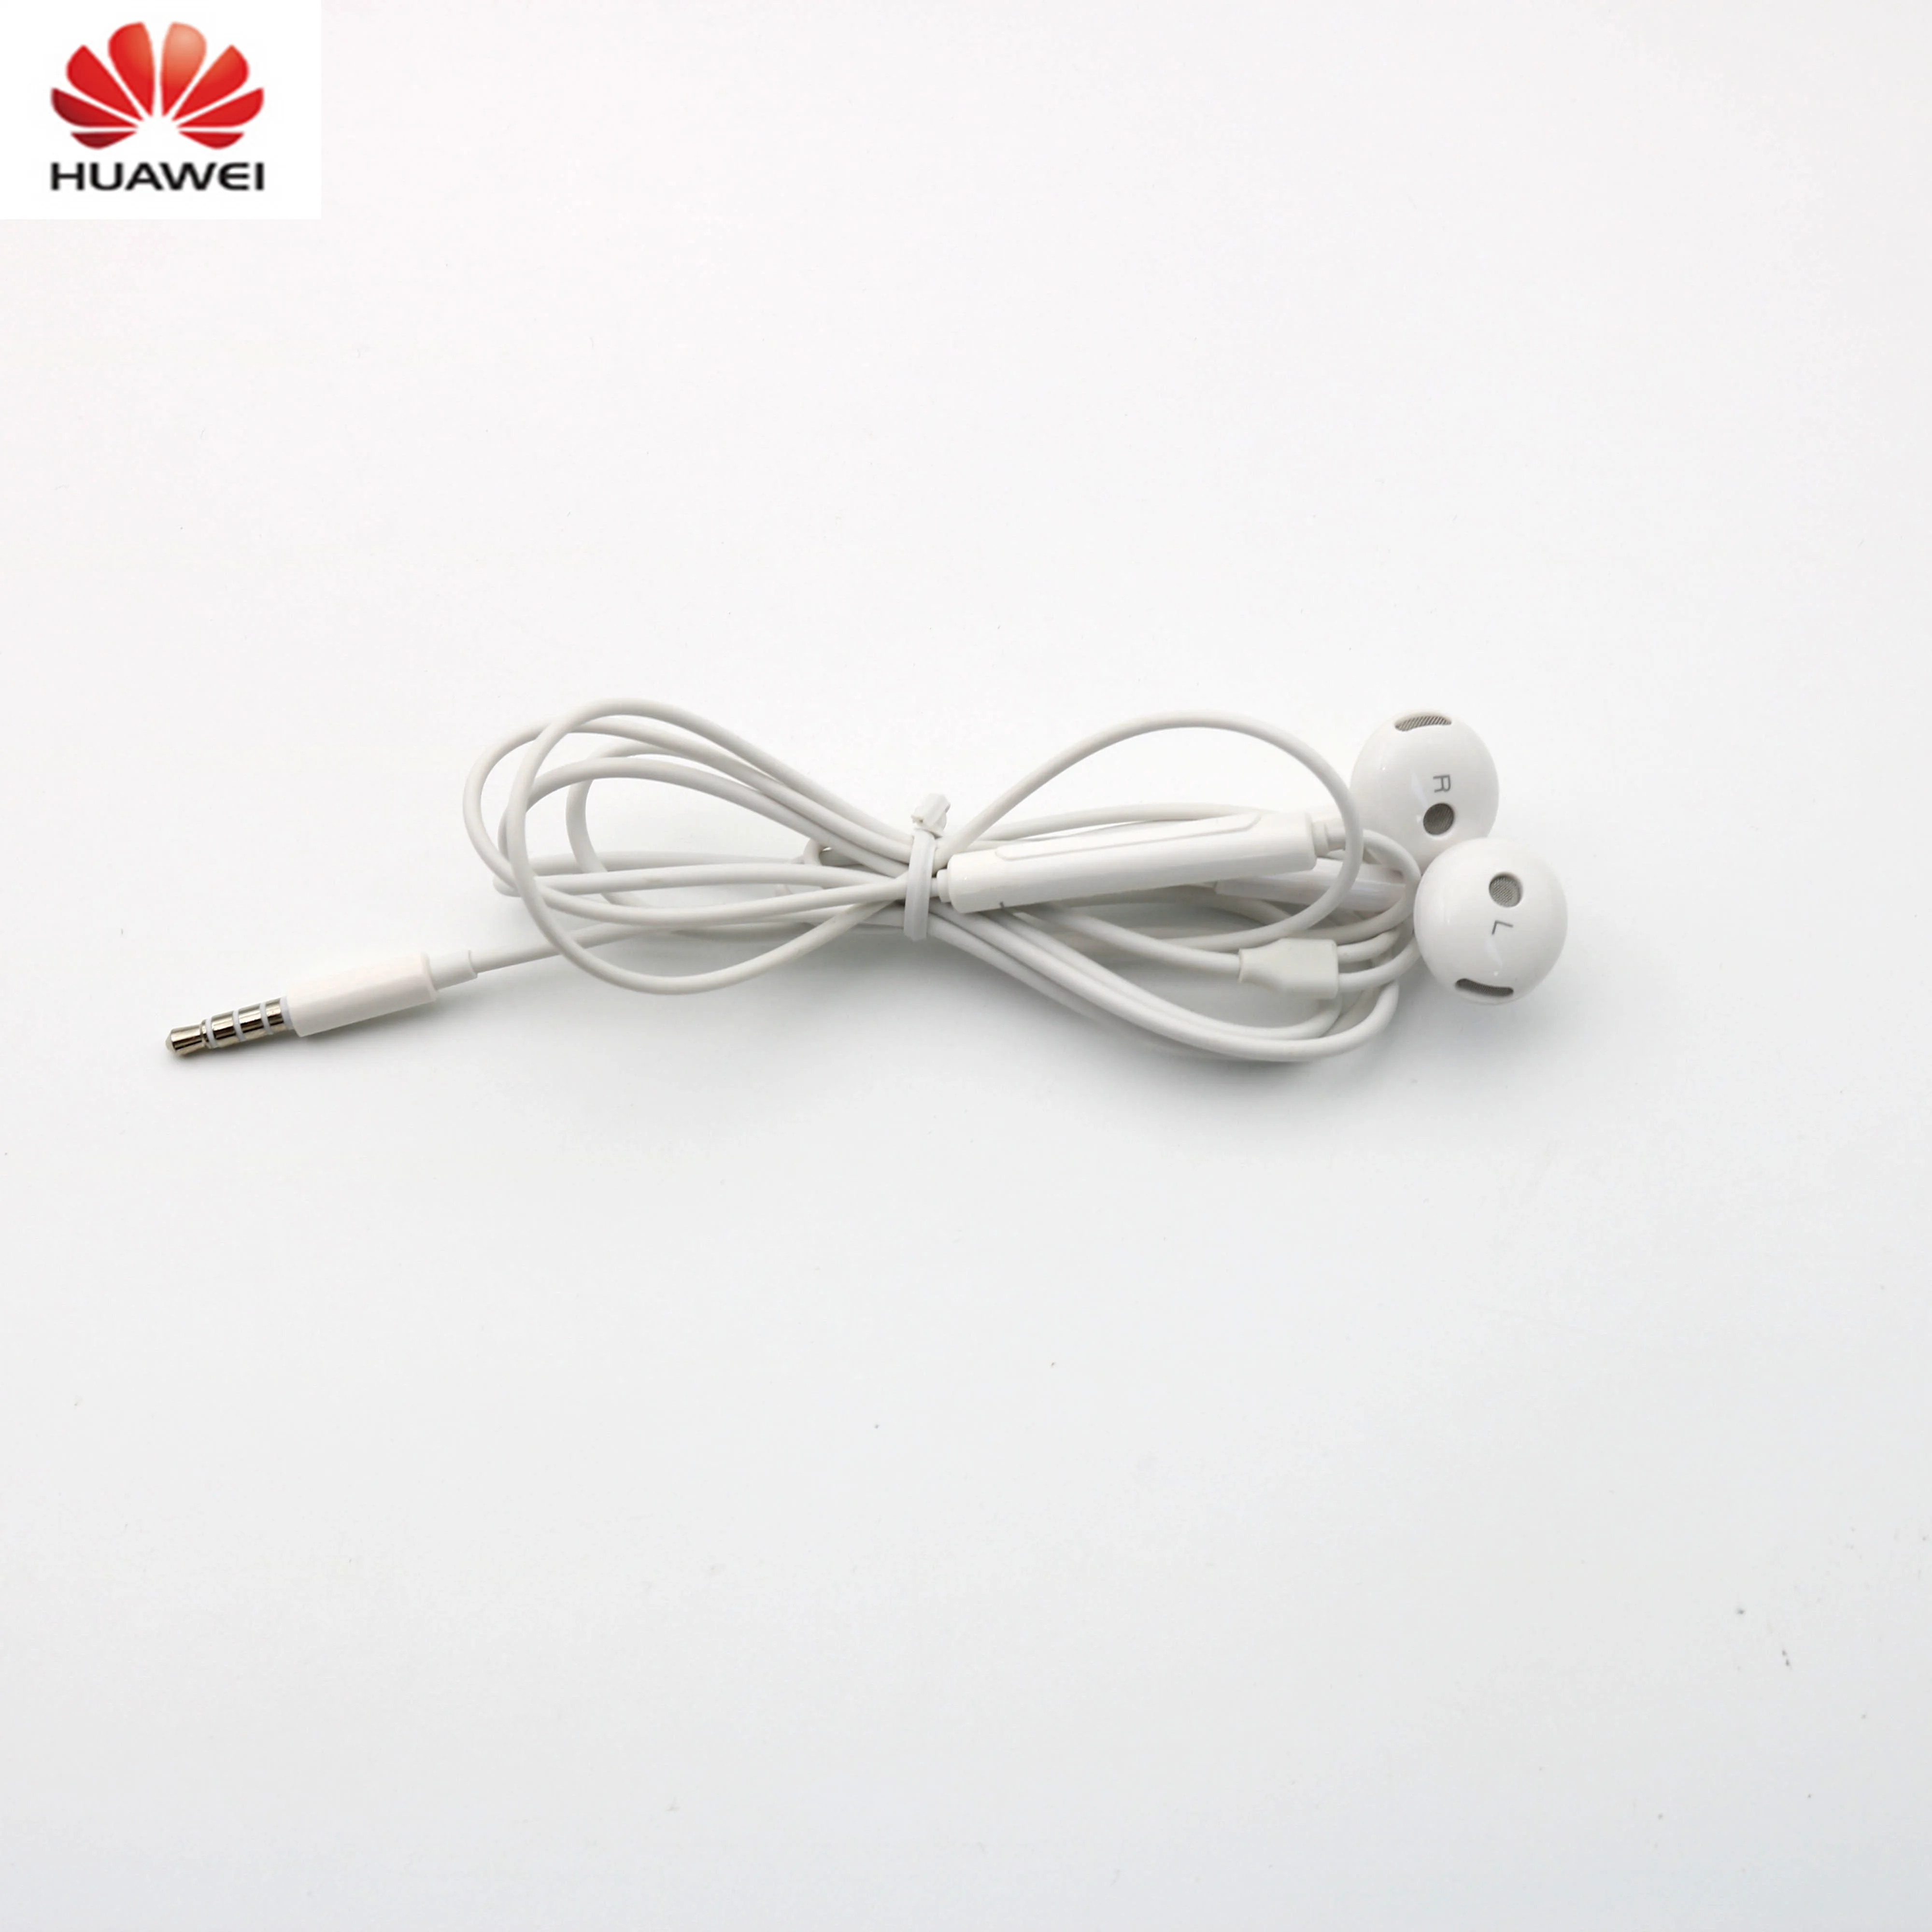 Original Huawei Honor AM115 Earphone With 1.1m Length wired Control Mic Volume Speaker suppor easy headset | Электроника